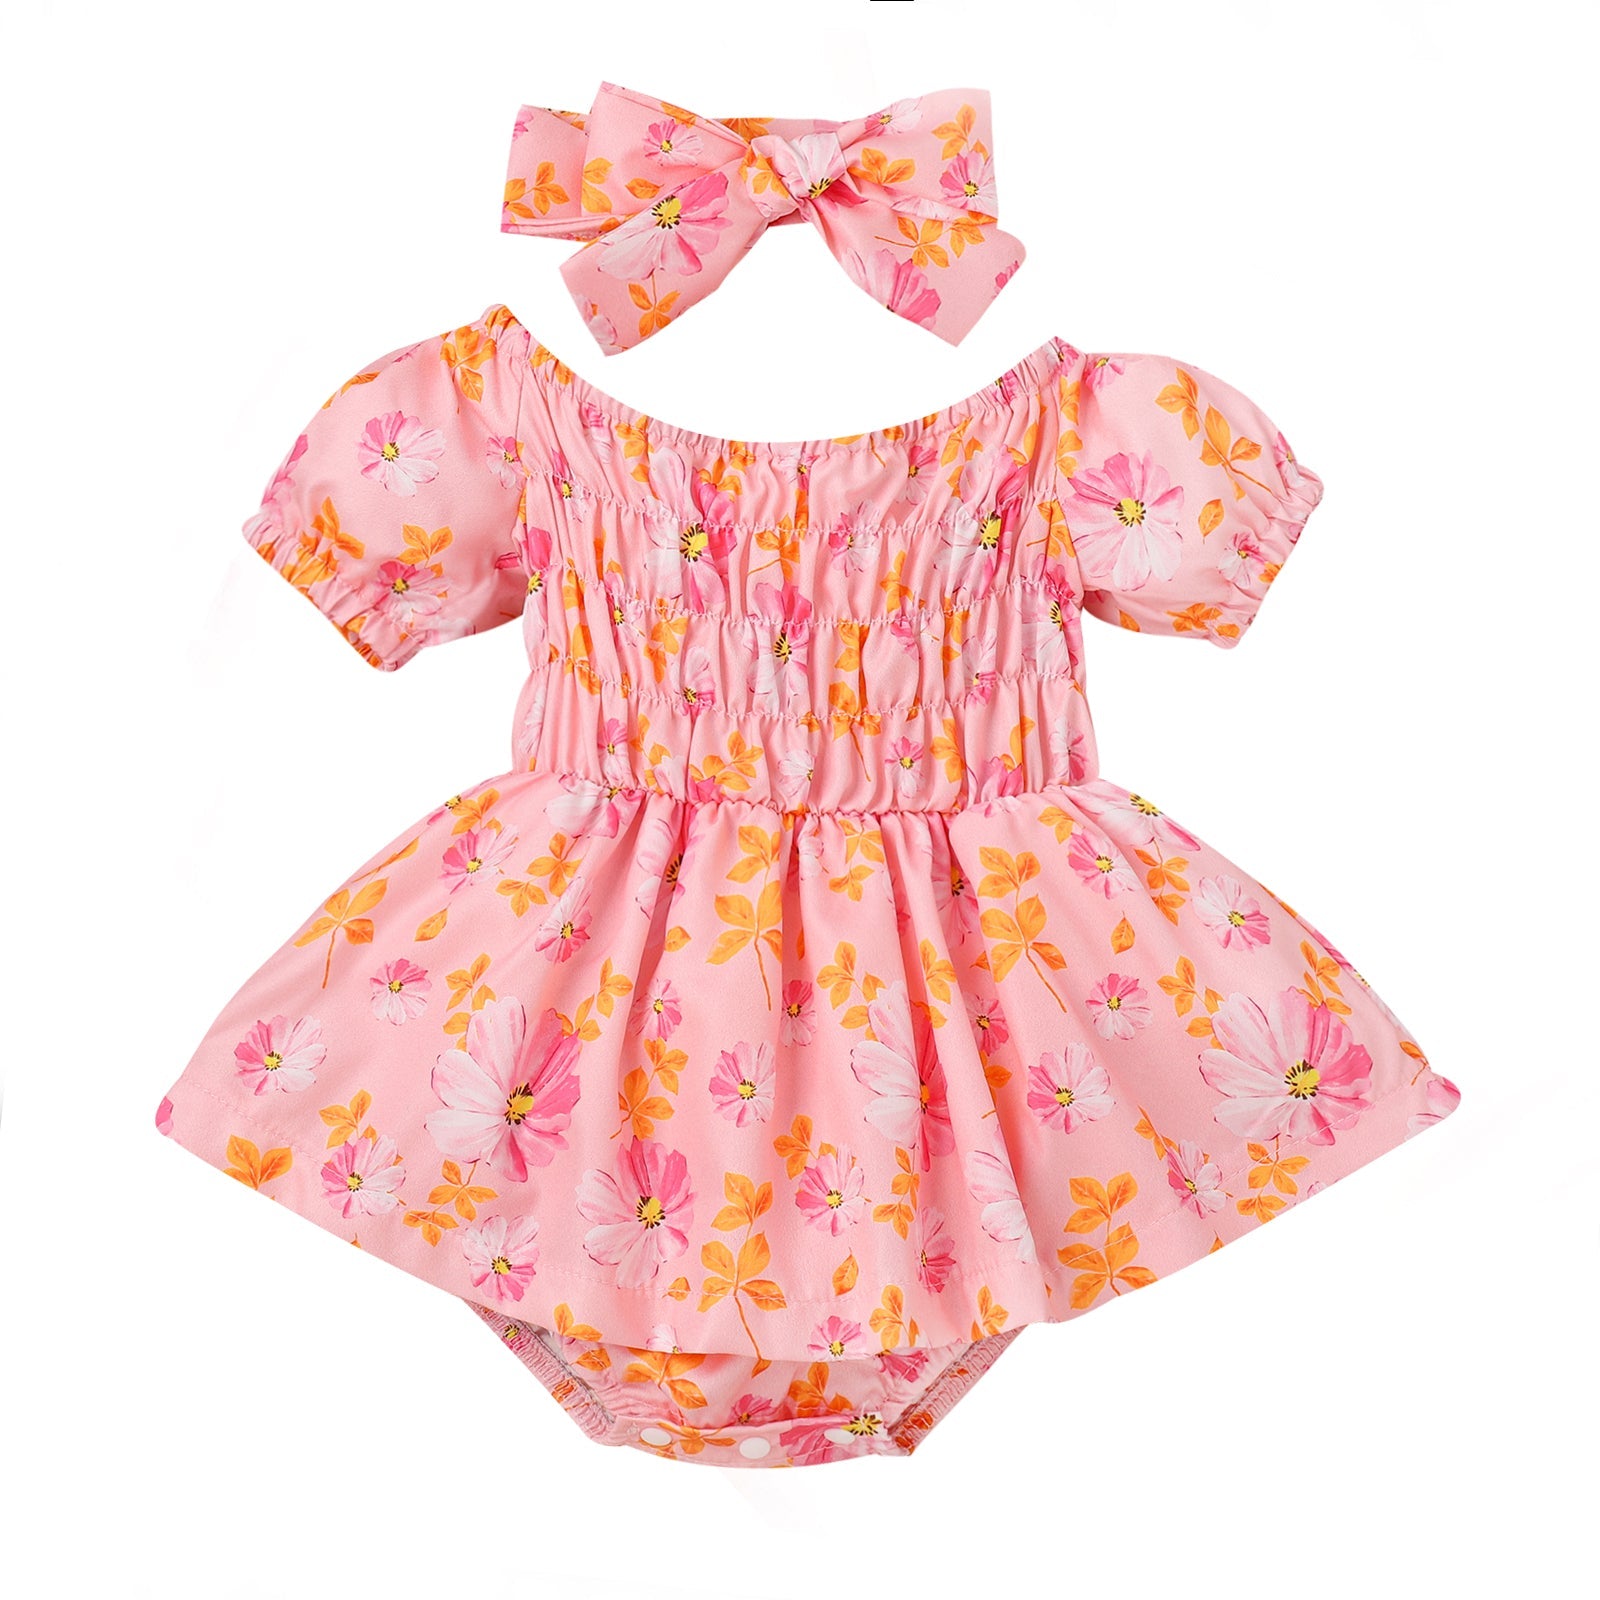 Baby Girl Floral Dress.